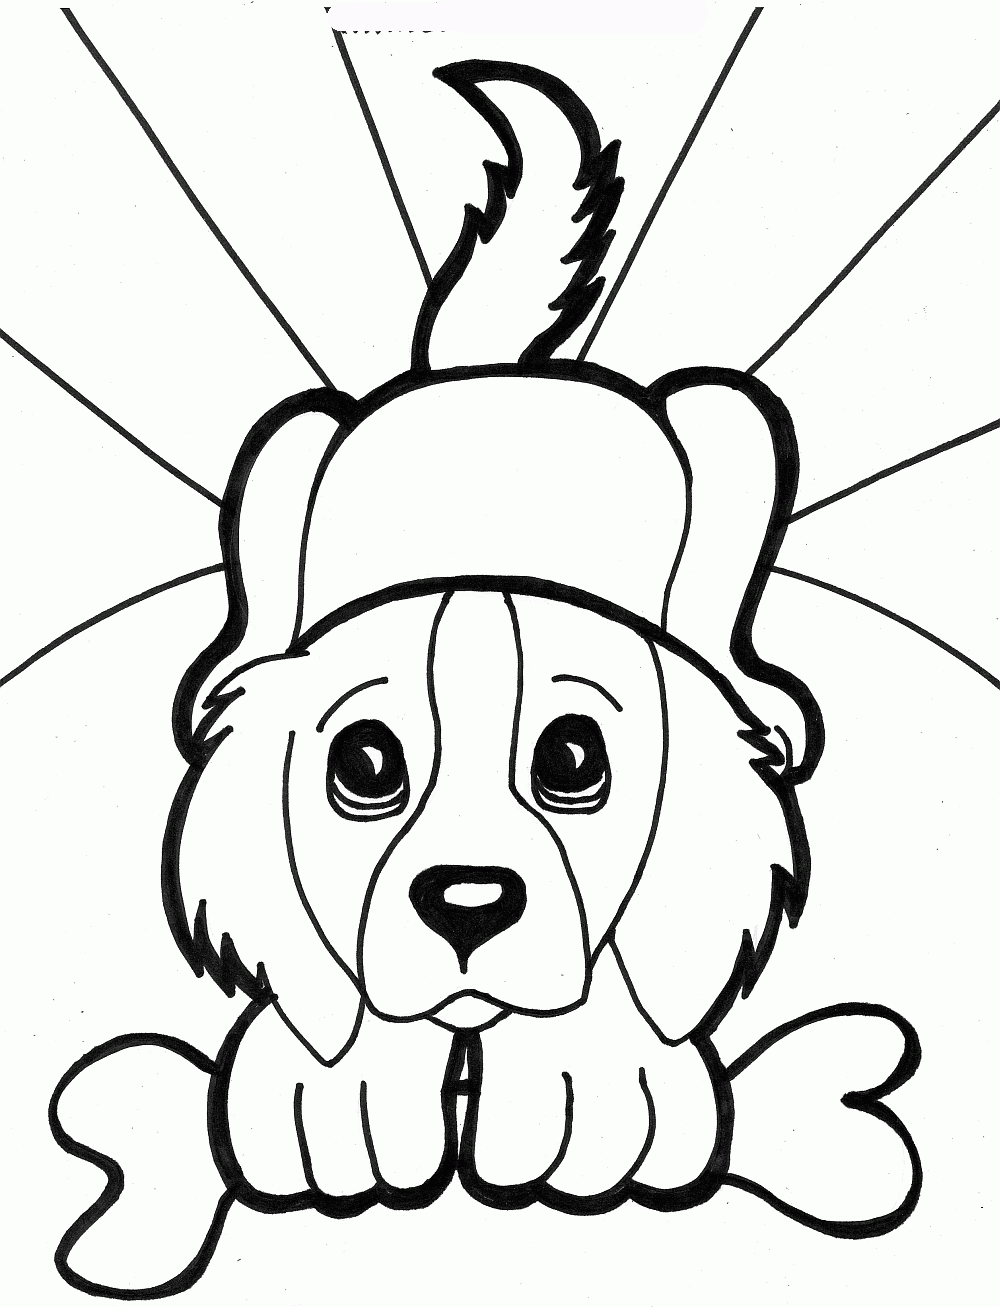 Printable Dogs Coloring Pages To Kids Coloring Wallpapers Download Free Images Wallpaper [coloring436.blogspot.com]